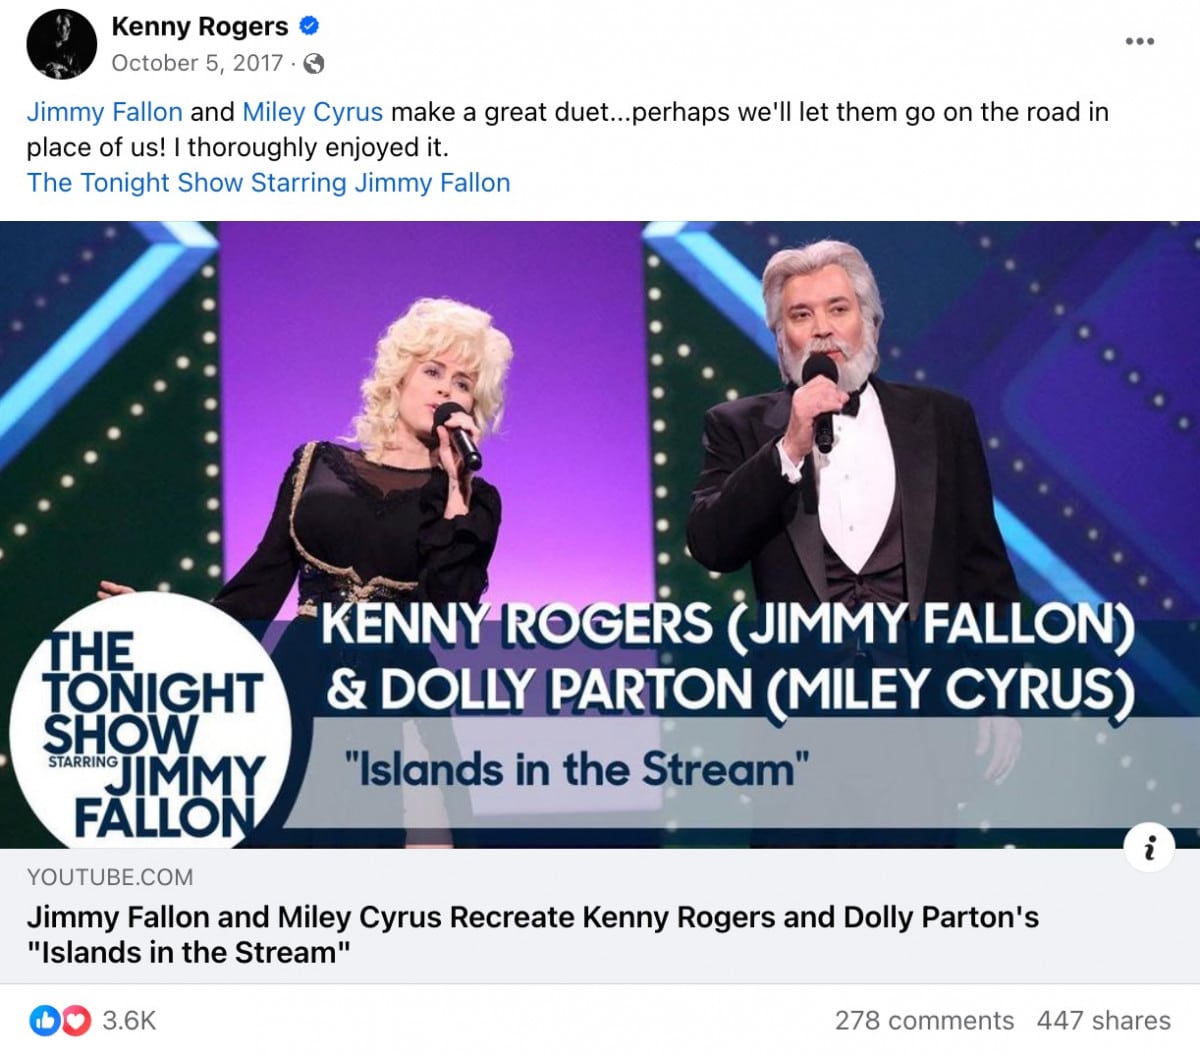 Kenny Rogers' reaction to Jimmy Fallon and Miley Cyrus performing as Kenny and Dolly